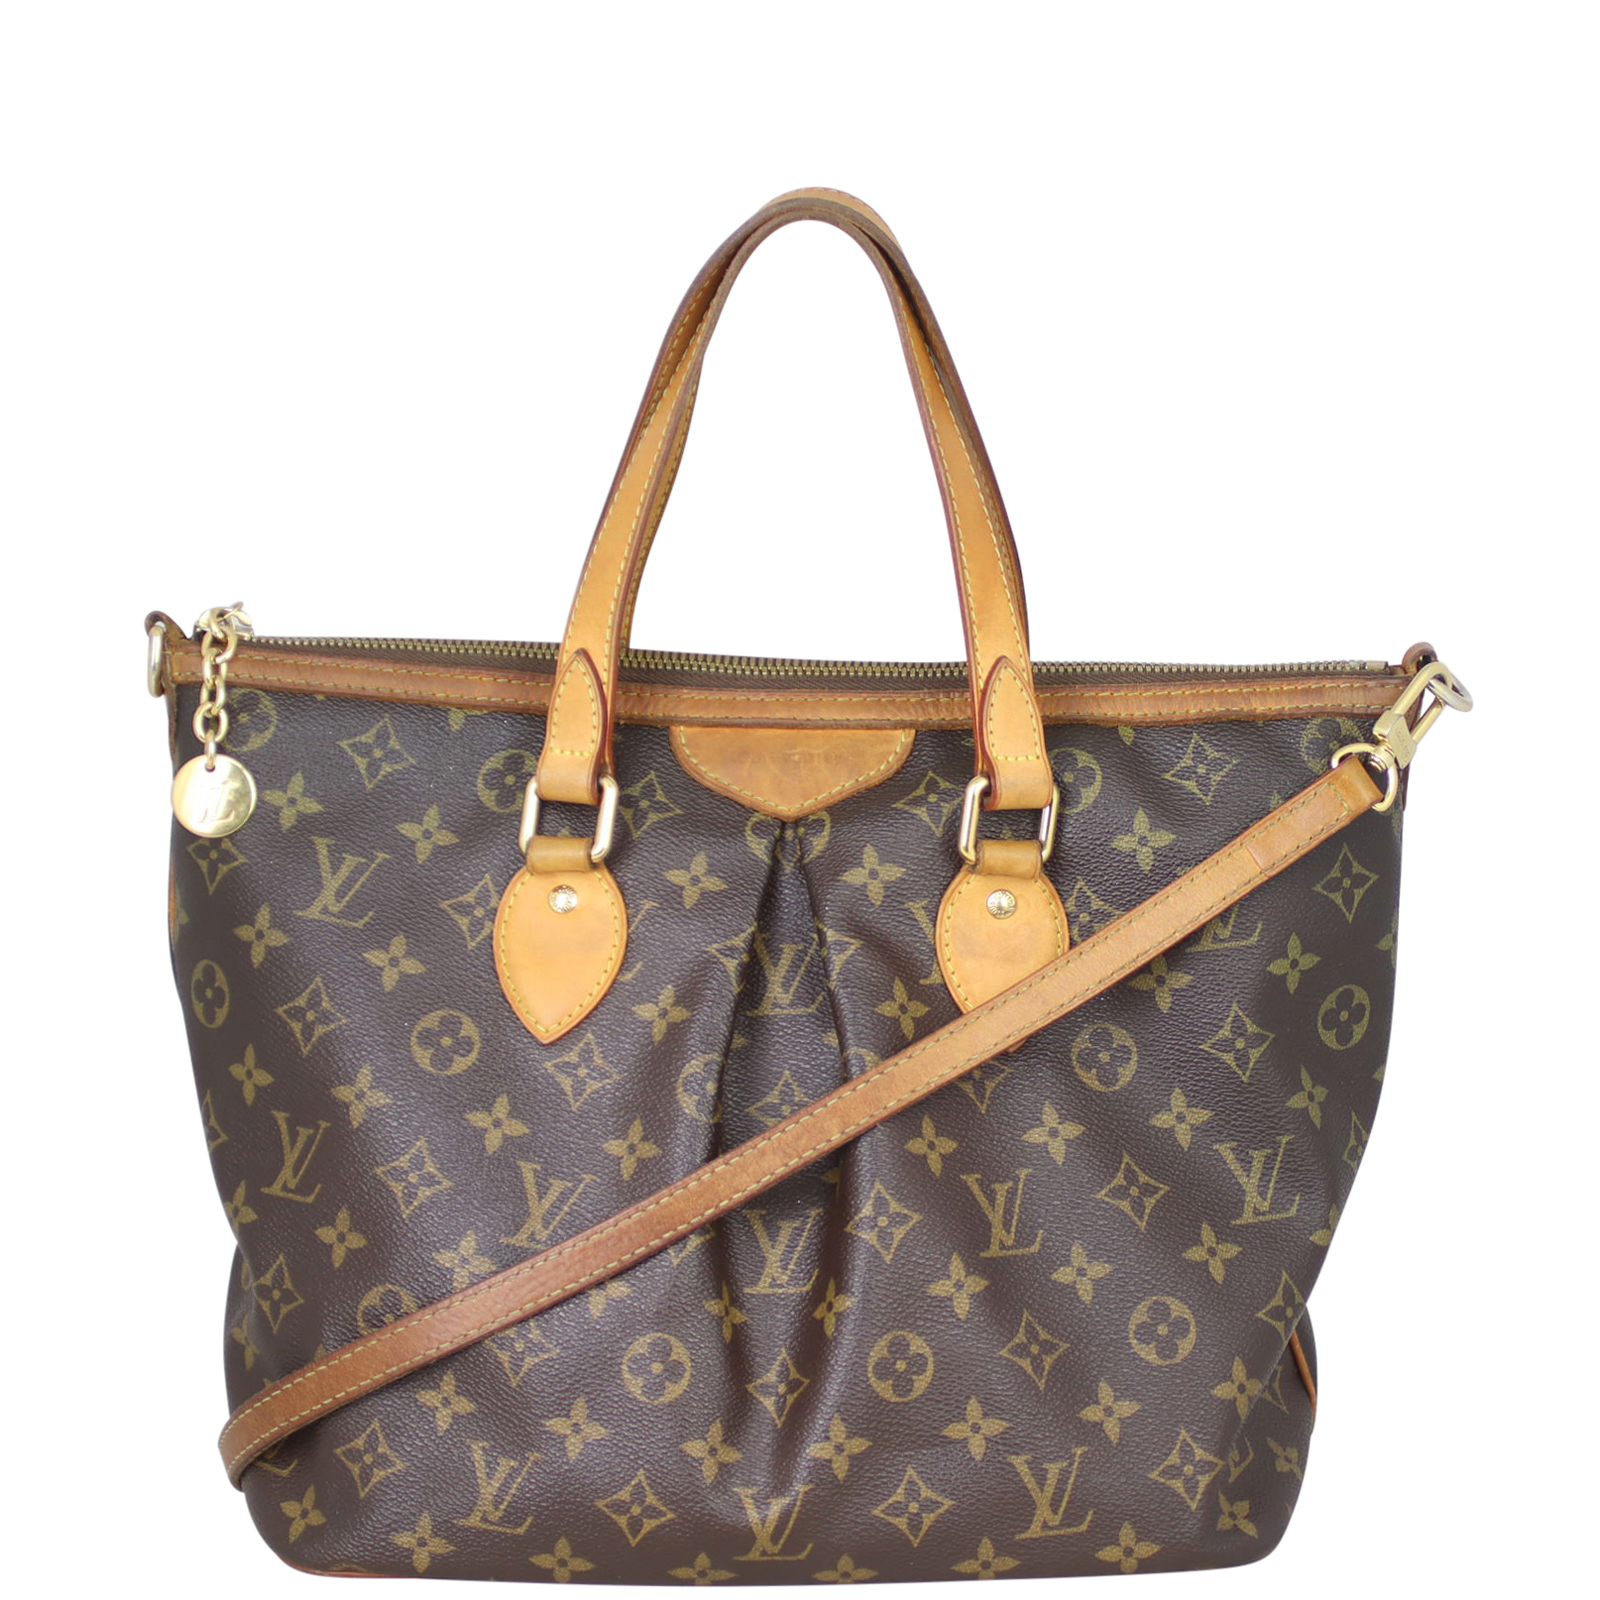 For a feminine and spacious shopper, Louis Vuitton's Palermo is exactly the bag you need. Bringing a